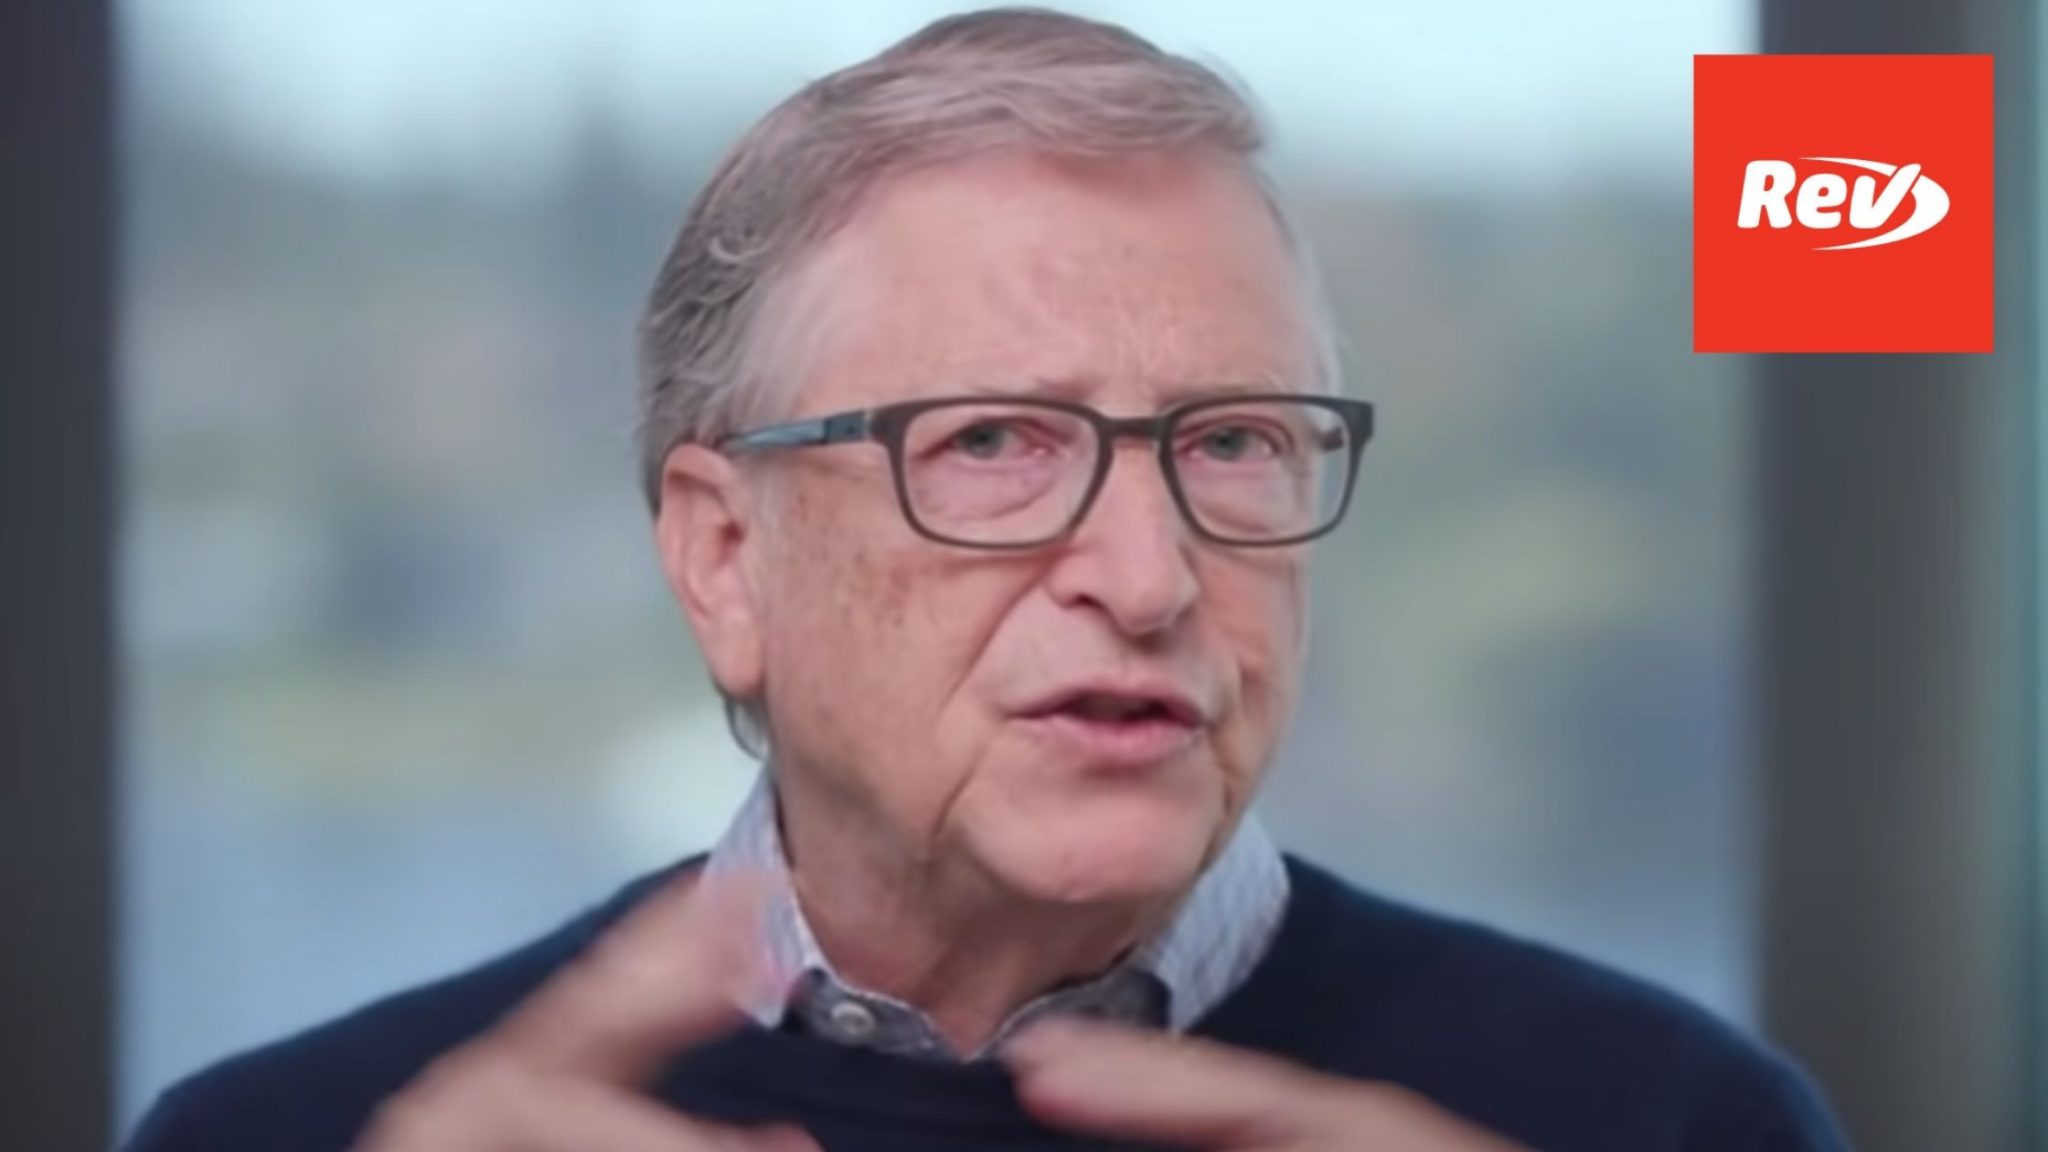 Bill Gates PBS Interview Transcript: Vaccine Equity, Climate, Epstein Meetings